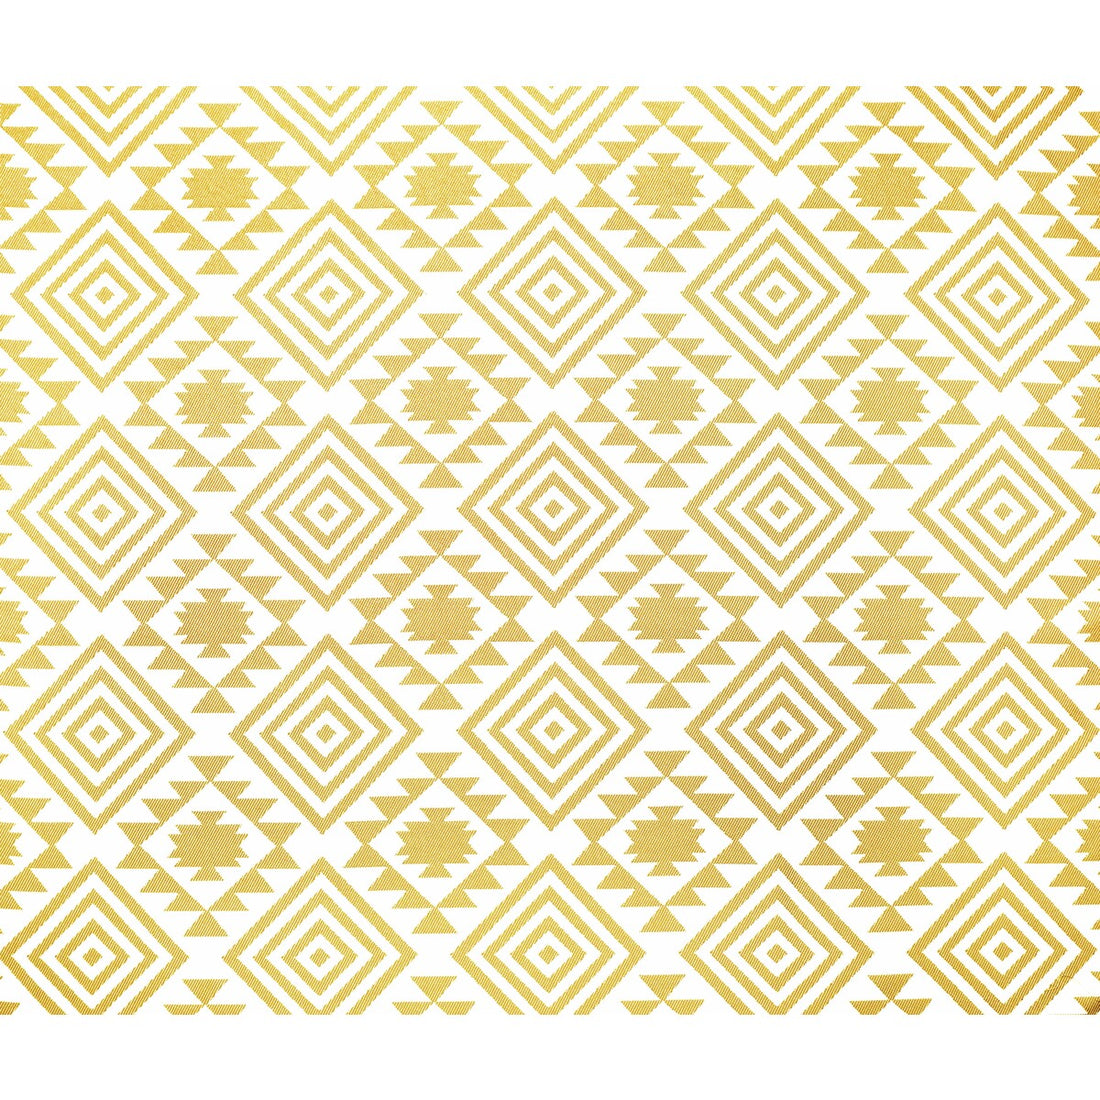 Ava fabric in amarillo color - pattern GDT5383.6.0 - by Gaston y Daniela in the Gaston Africalia collection